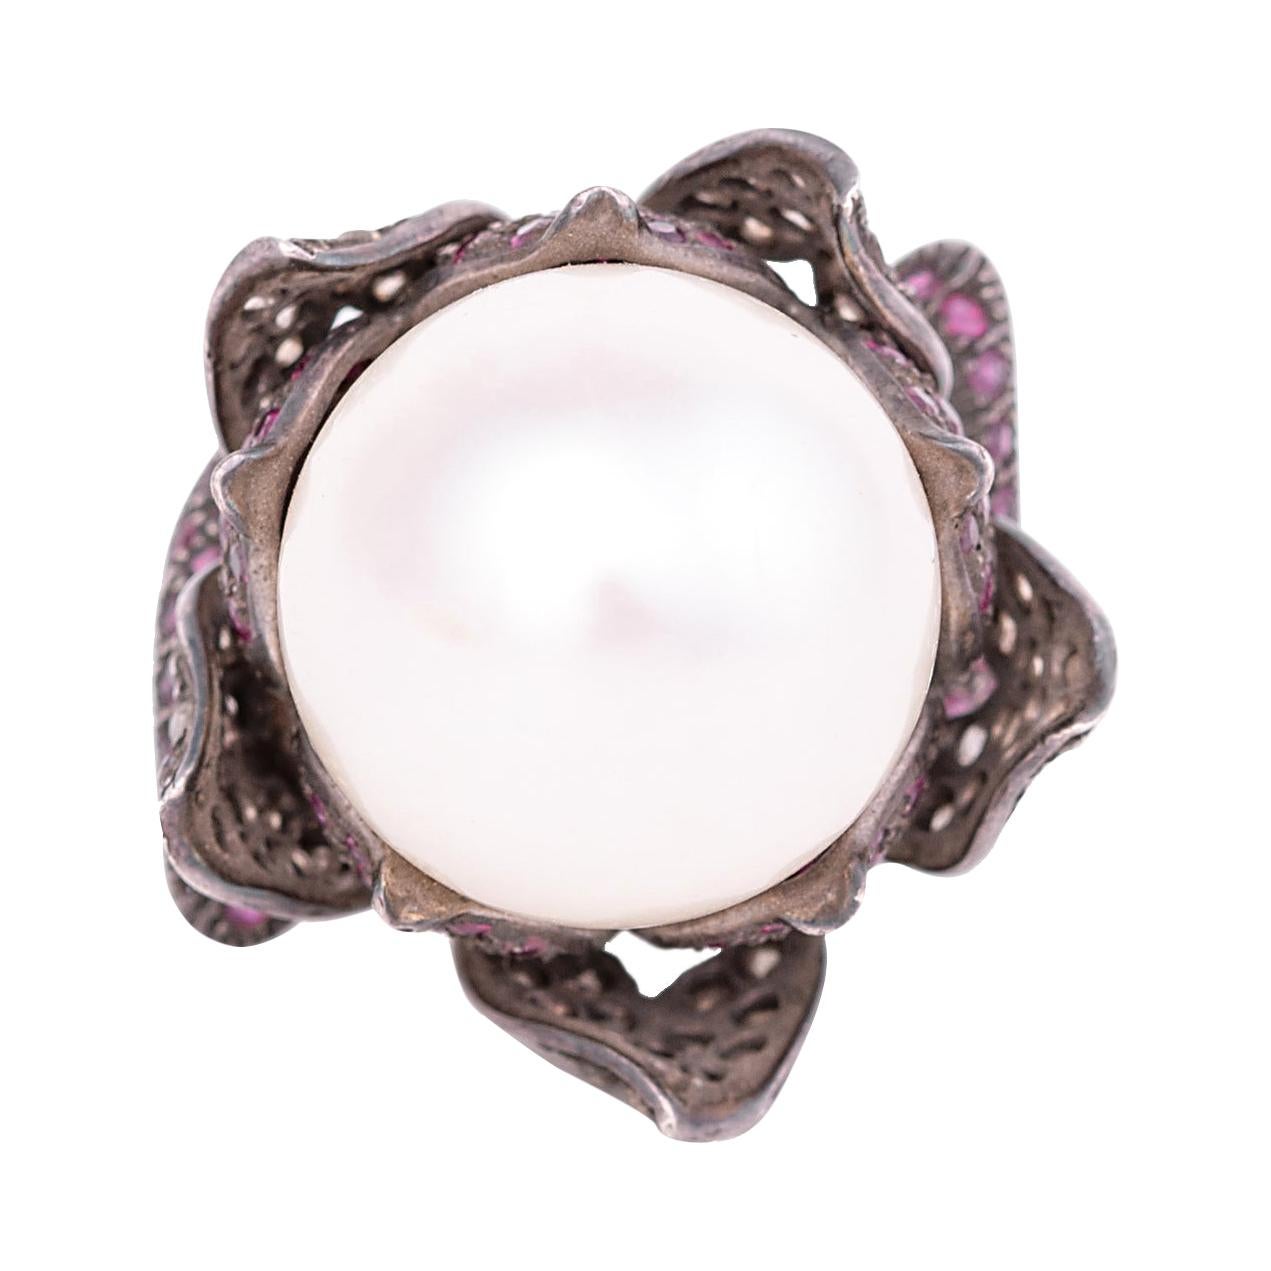 Diamond, Pearl, and Ruby Cocktail Flower Ring in Art-Deco Style